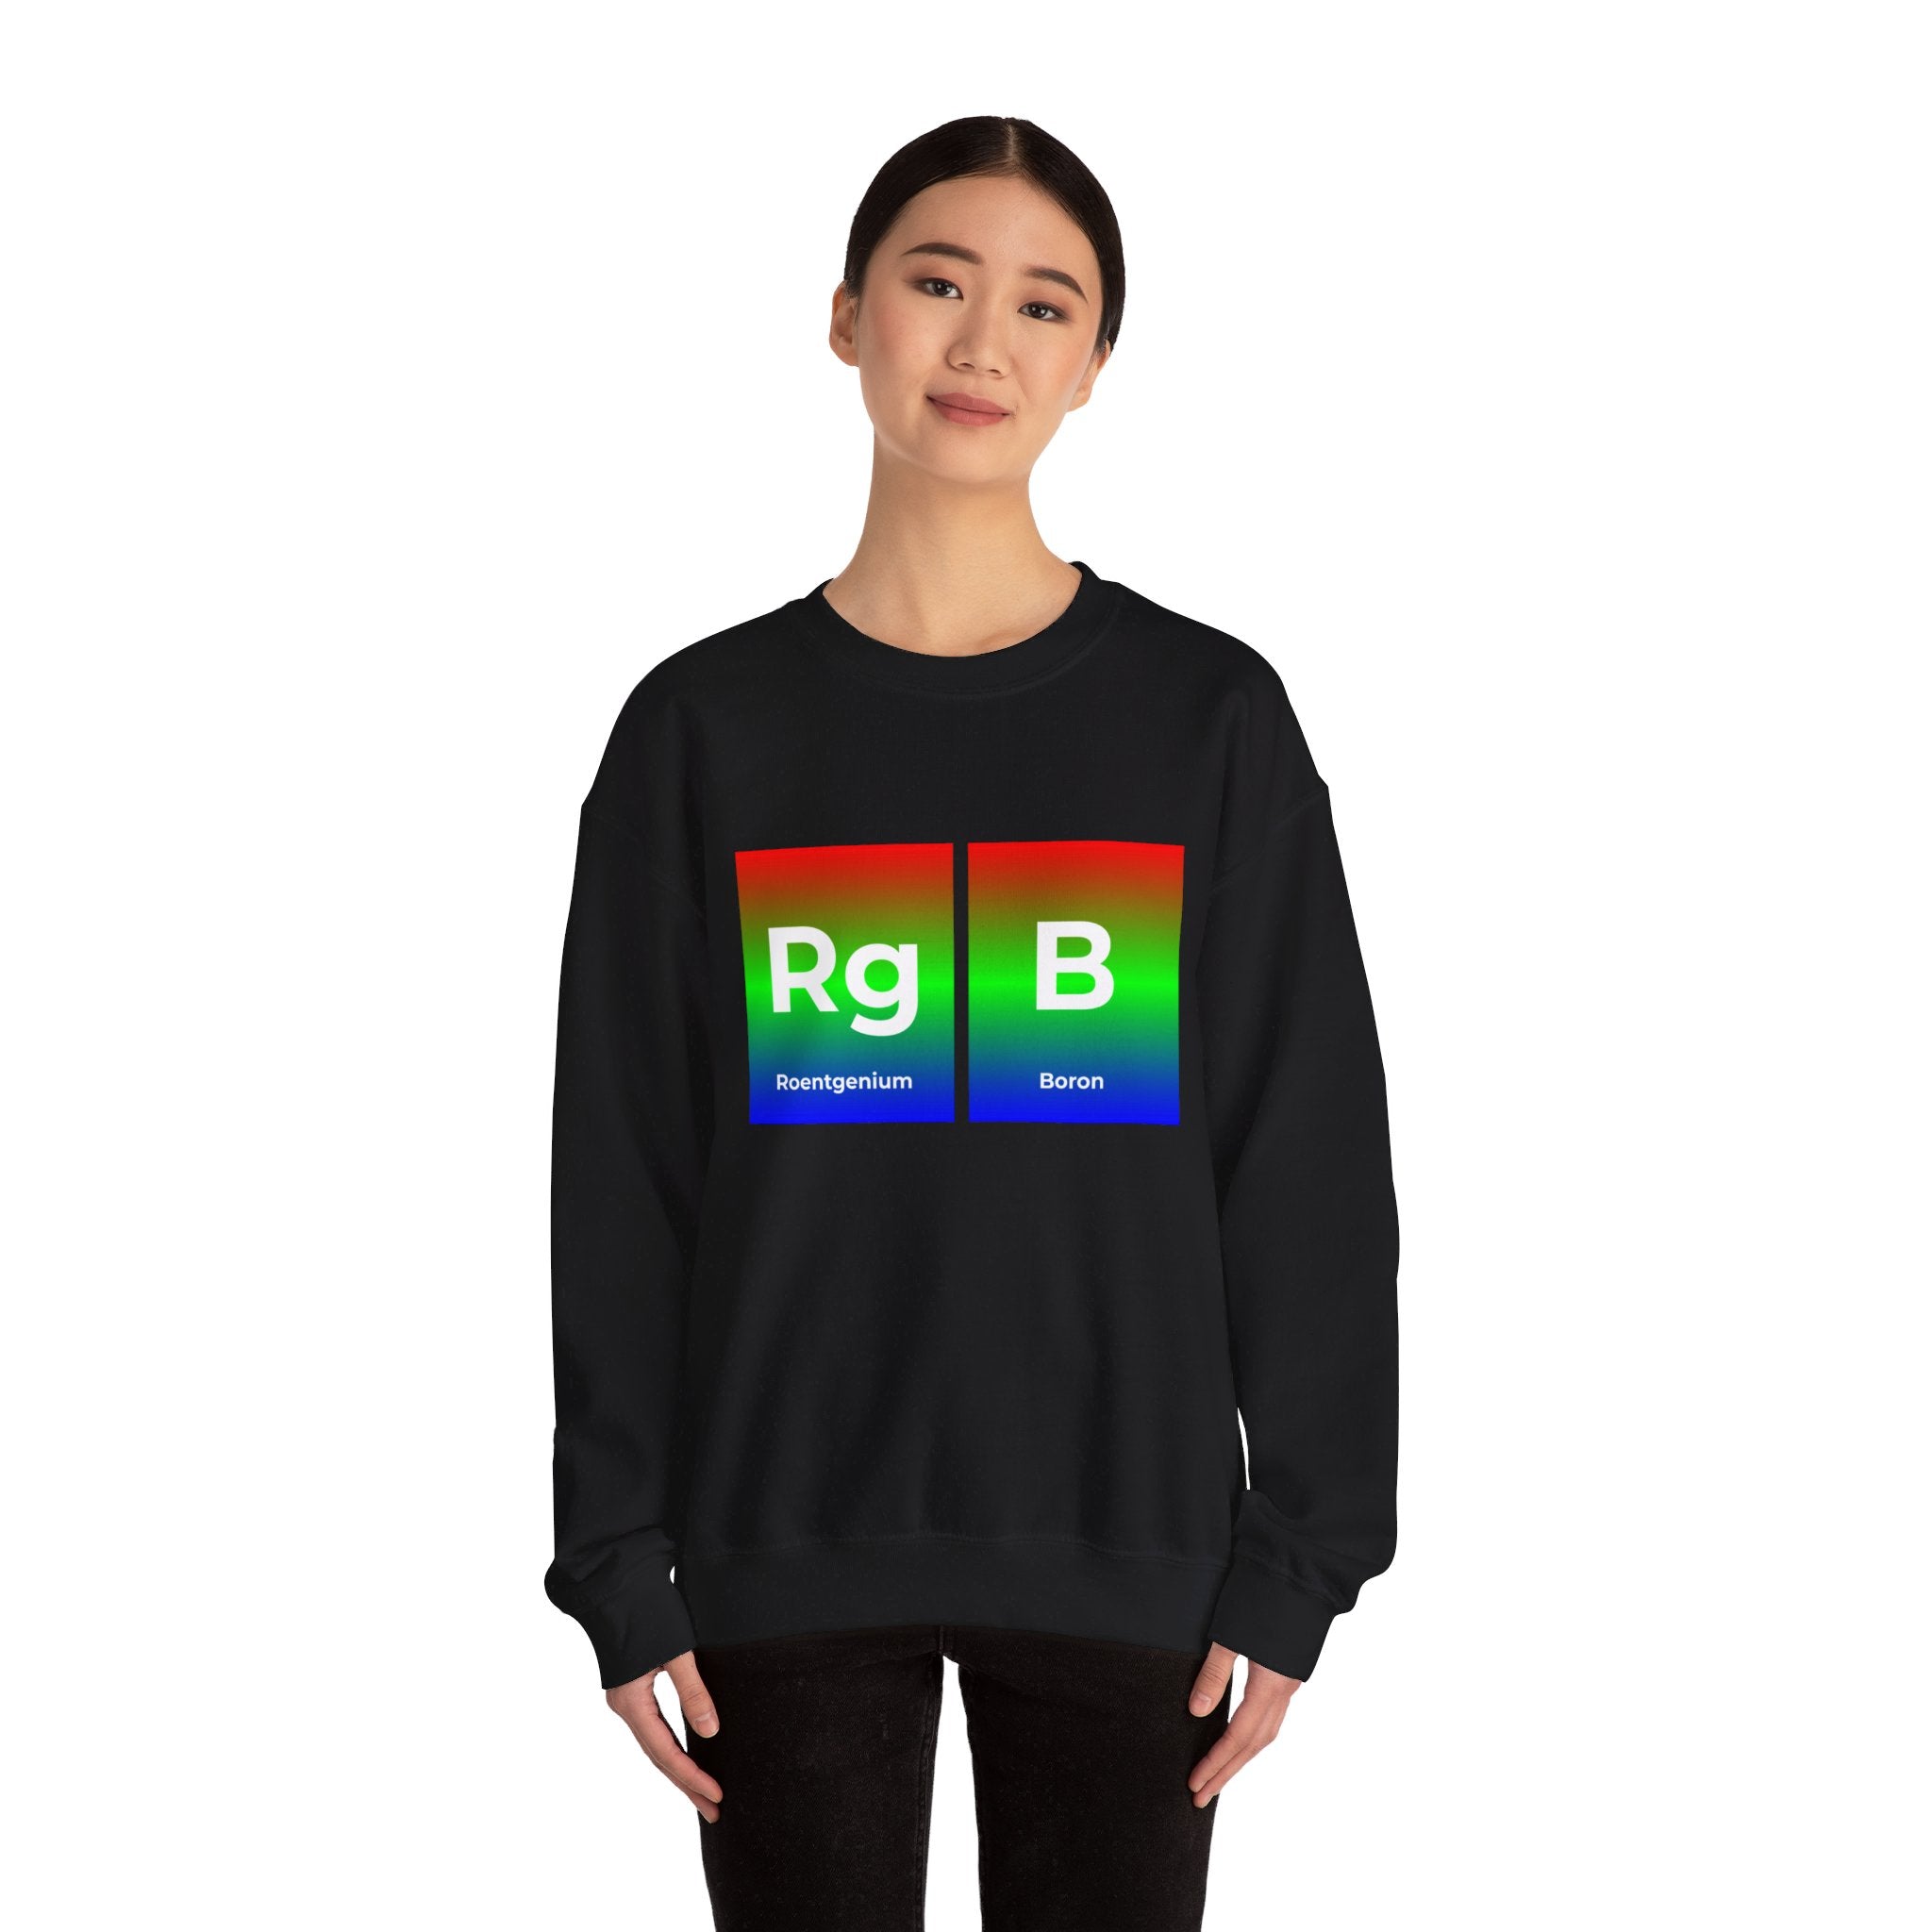 Person wearing a RG-B - Sweatshirt featuring a design of periodic table elements 'Roentgenium' (Rg) and 'Boron' (B) with an RGB color scheme in the background, perfect for comfort lovers.